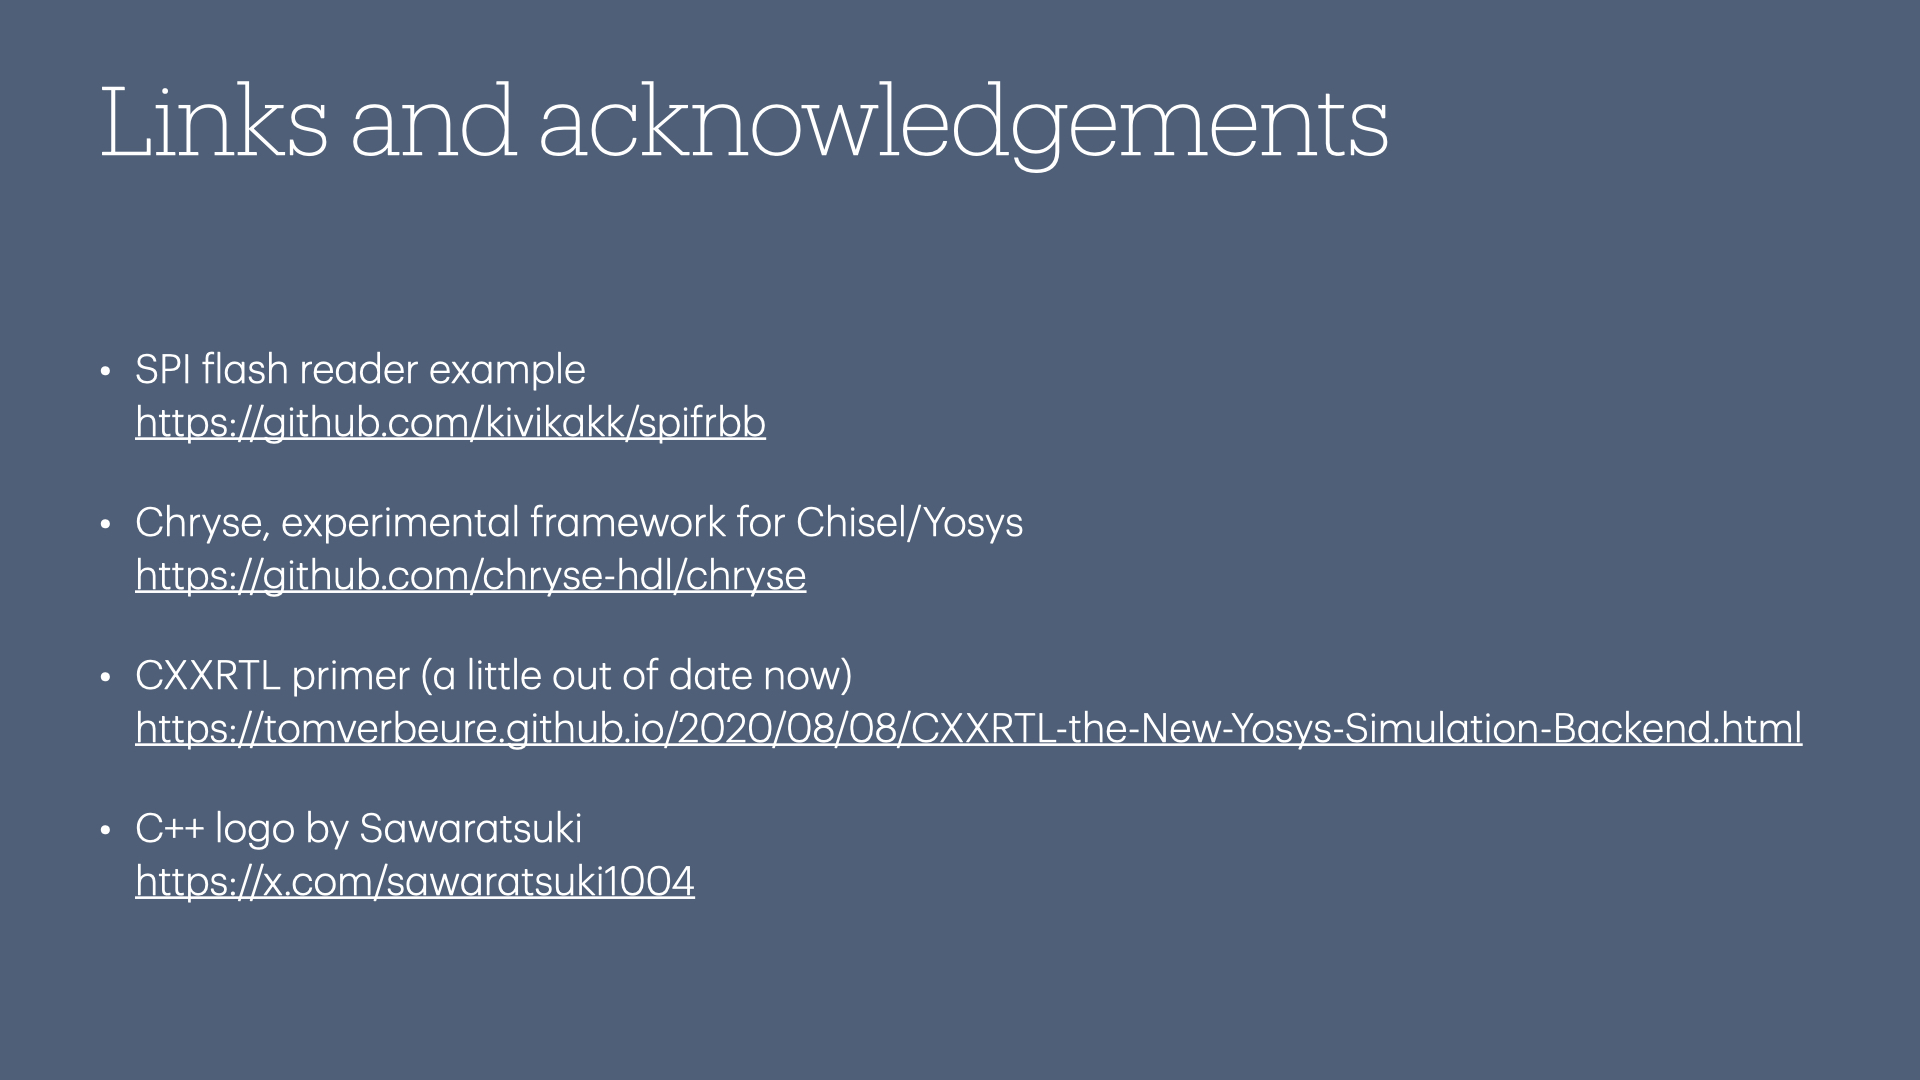 A list of links and acknowledgements, included below the text that follows.